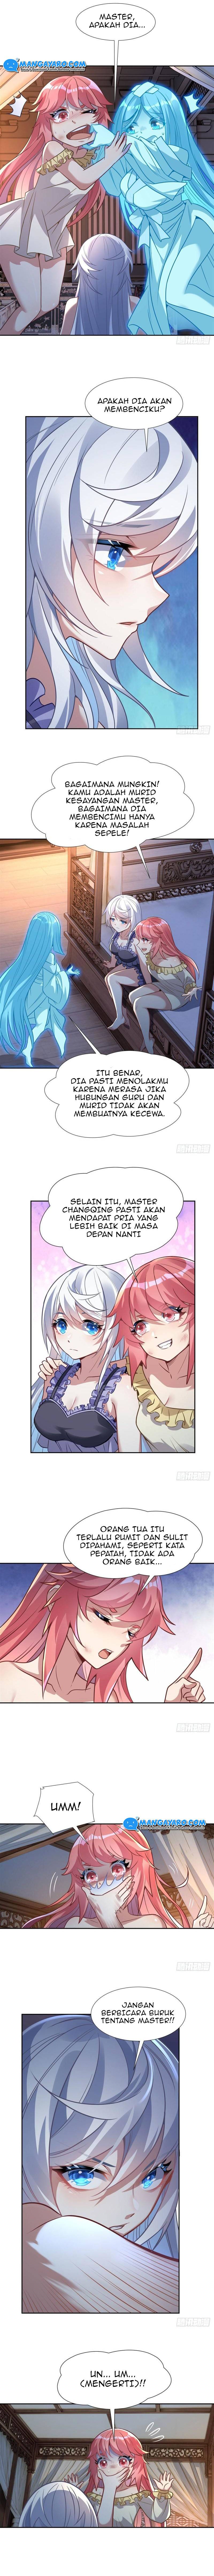 Dilarang COPAS - situs resmi www.mangacanblog.com - Komik my female apprentices are all big shots from the future 074 - chapter 74 75 Indonesia my female apprentices are all big shots from the future 074 - chapter 74 Terbaru 4|Baca Manga Komik Indonesia|Mangacan